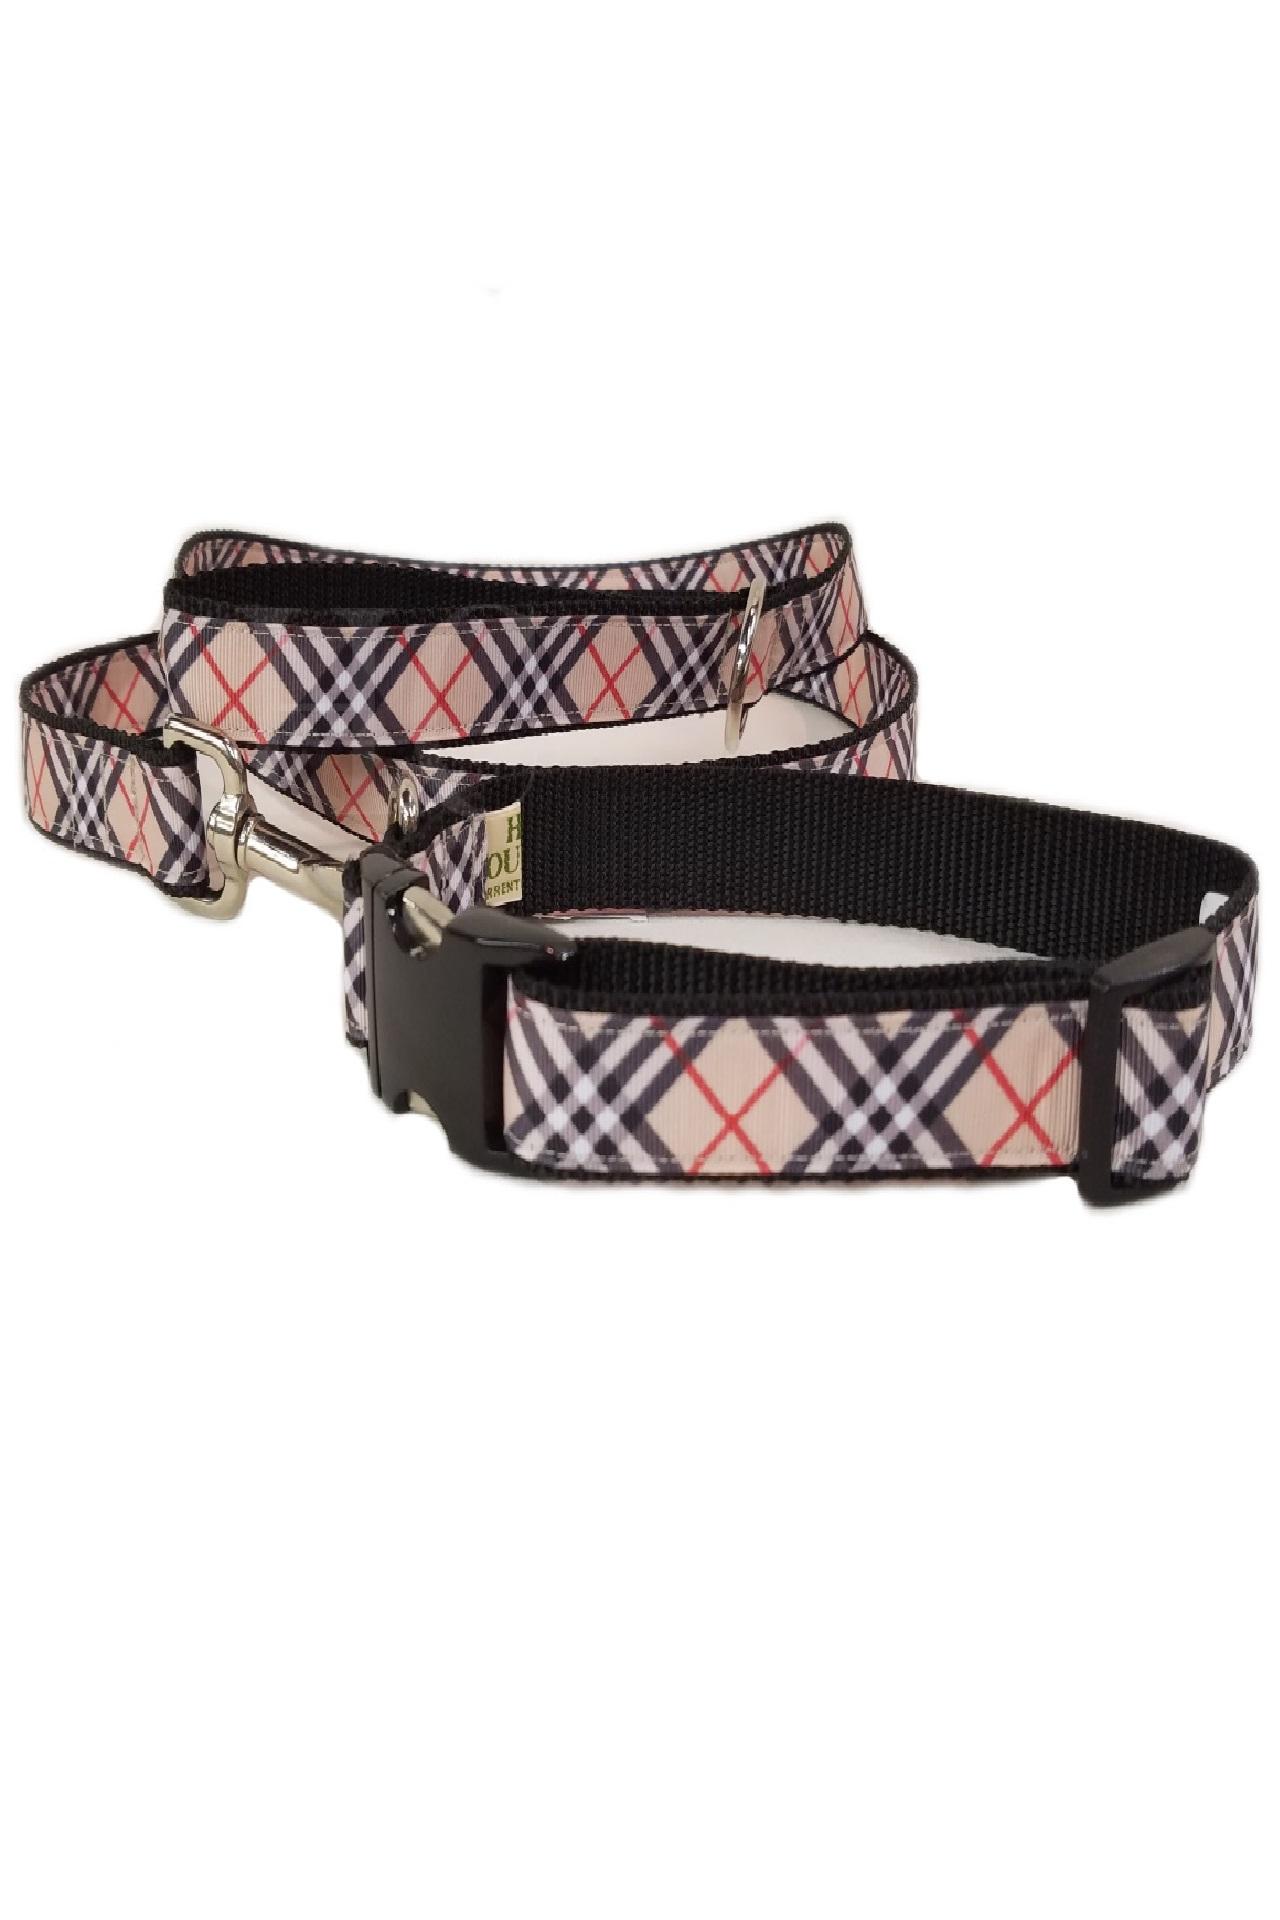 Burberry with Metal Horse Accessory Dog Collar and Leash